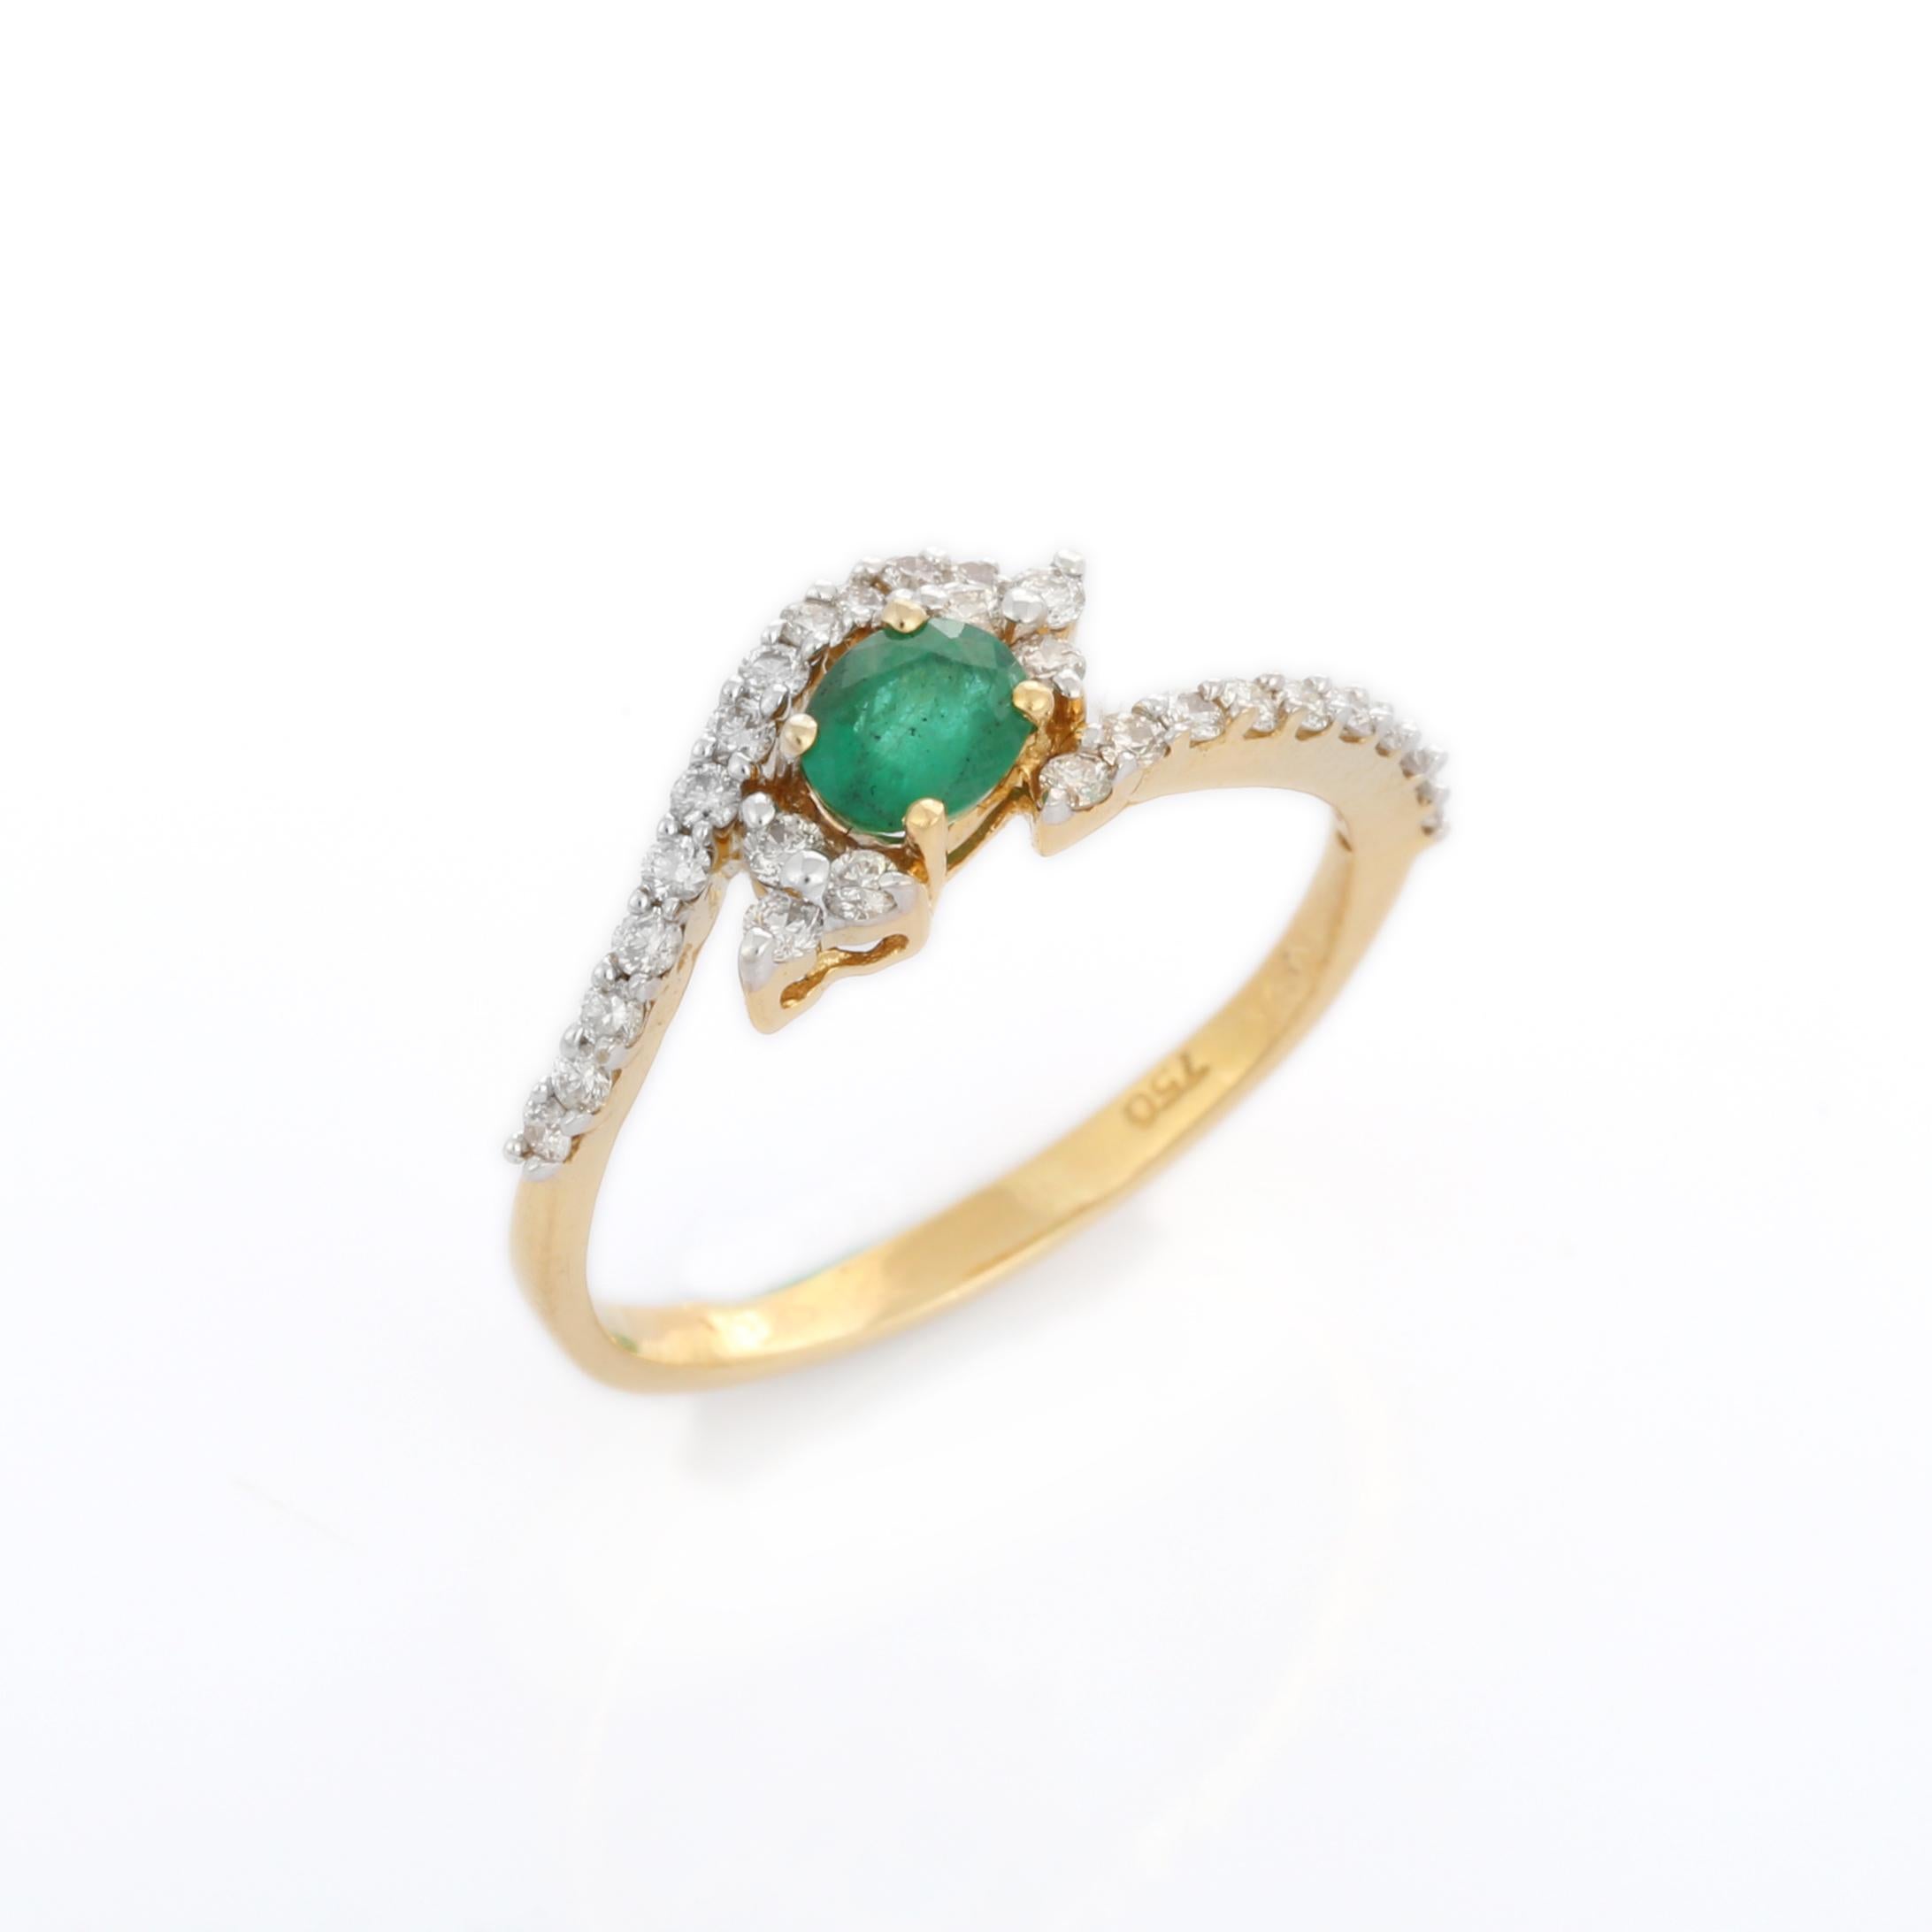 For Sale:  18K Yellow Gold Oval Shaped Emerald and Diamond Ring  6